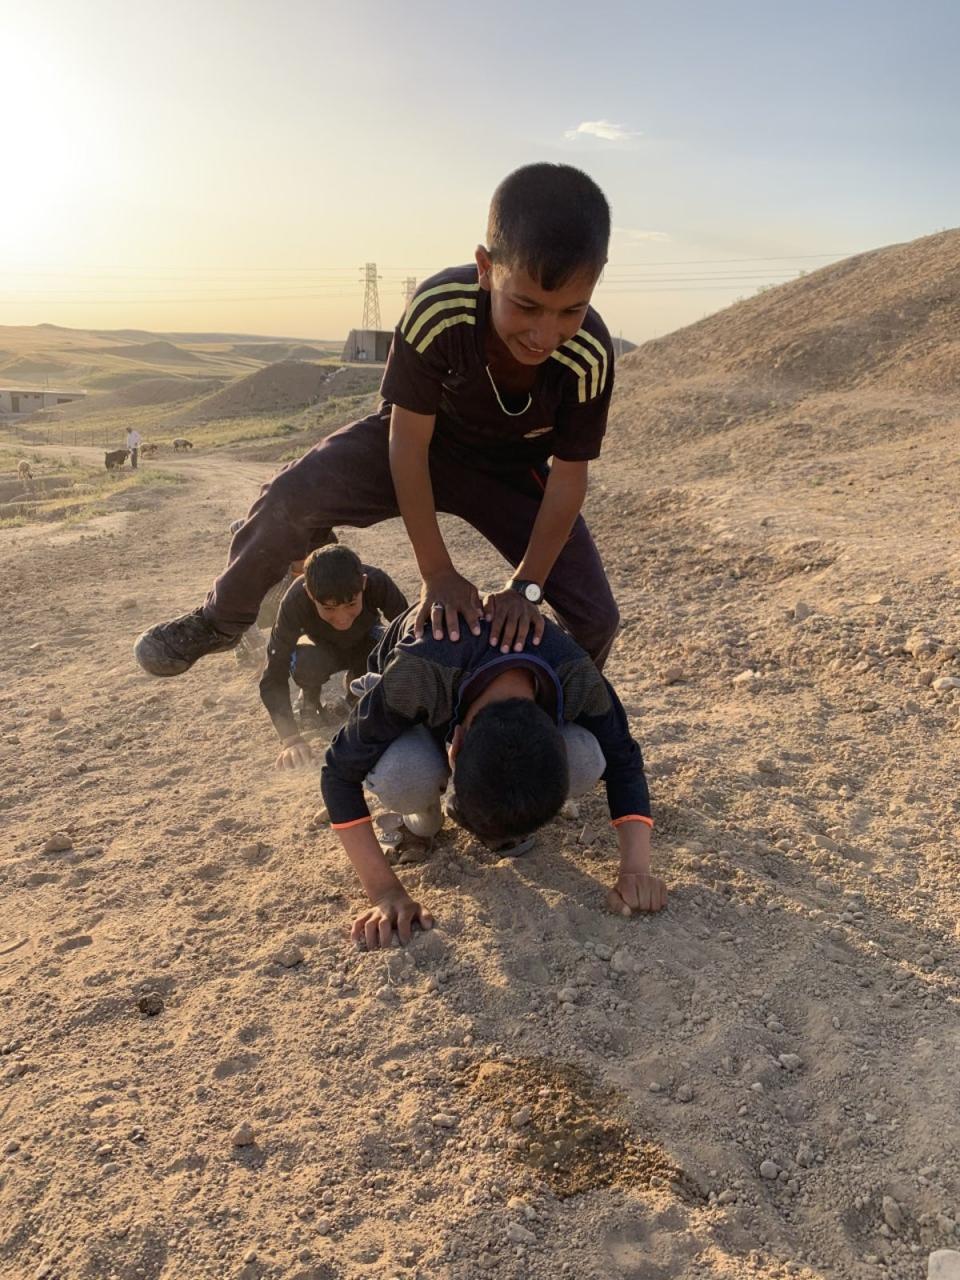 Francis Alÿs, Children's Game #20, Leapfrog, Nerkzlia, Iraq, 2018 (In collaboration with Ivan Boccara, Julien Devaux, and Félix Blume. Courtesy of the artist and the Barbican)